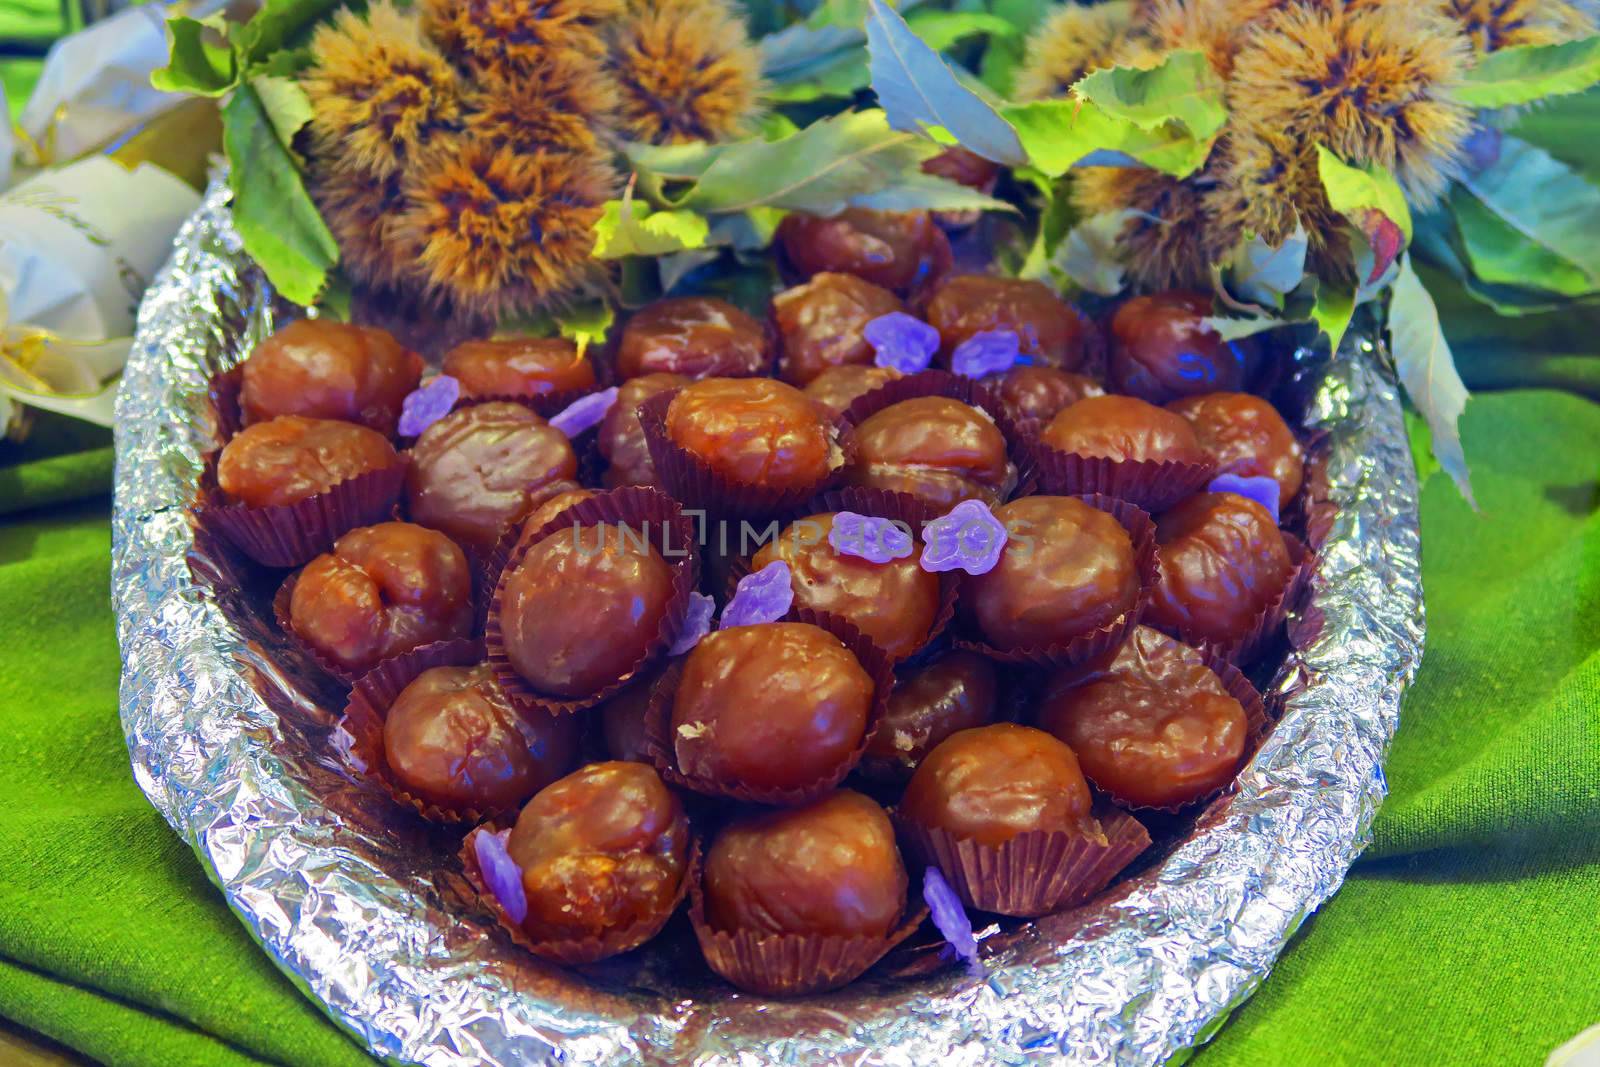 Marrons glaces with decorations